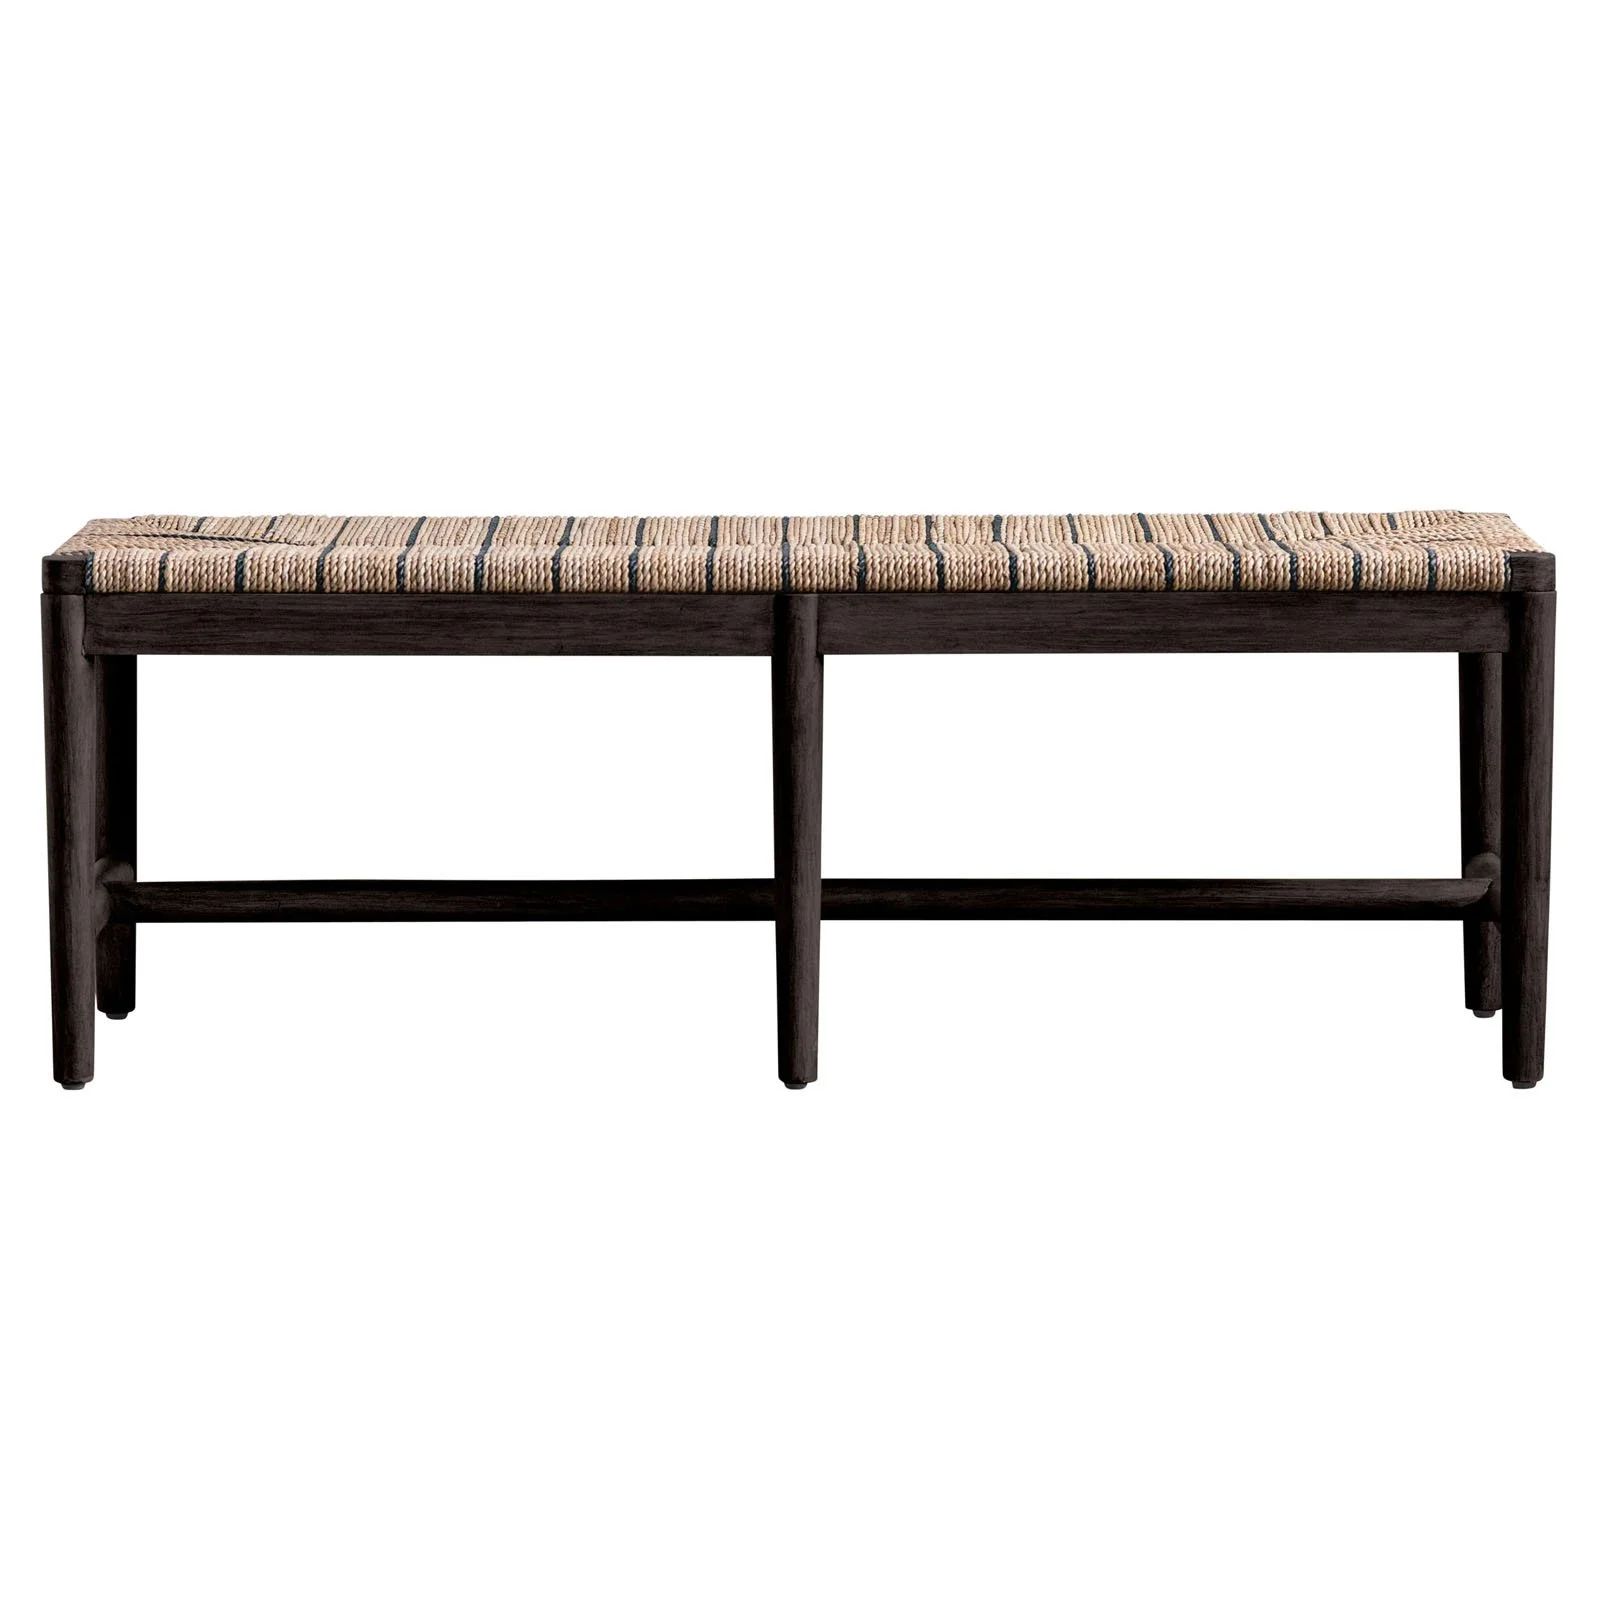 3R Studios Woven Rope and Mango Wood Dining Bench | Walmart (US)